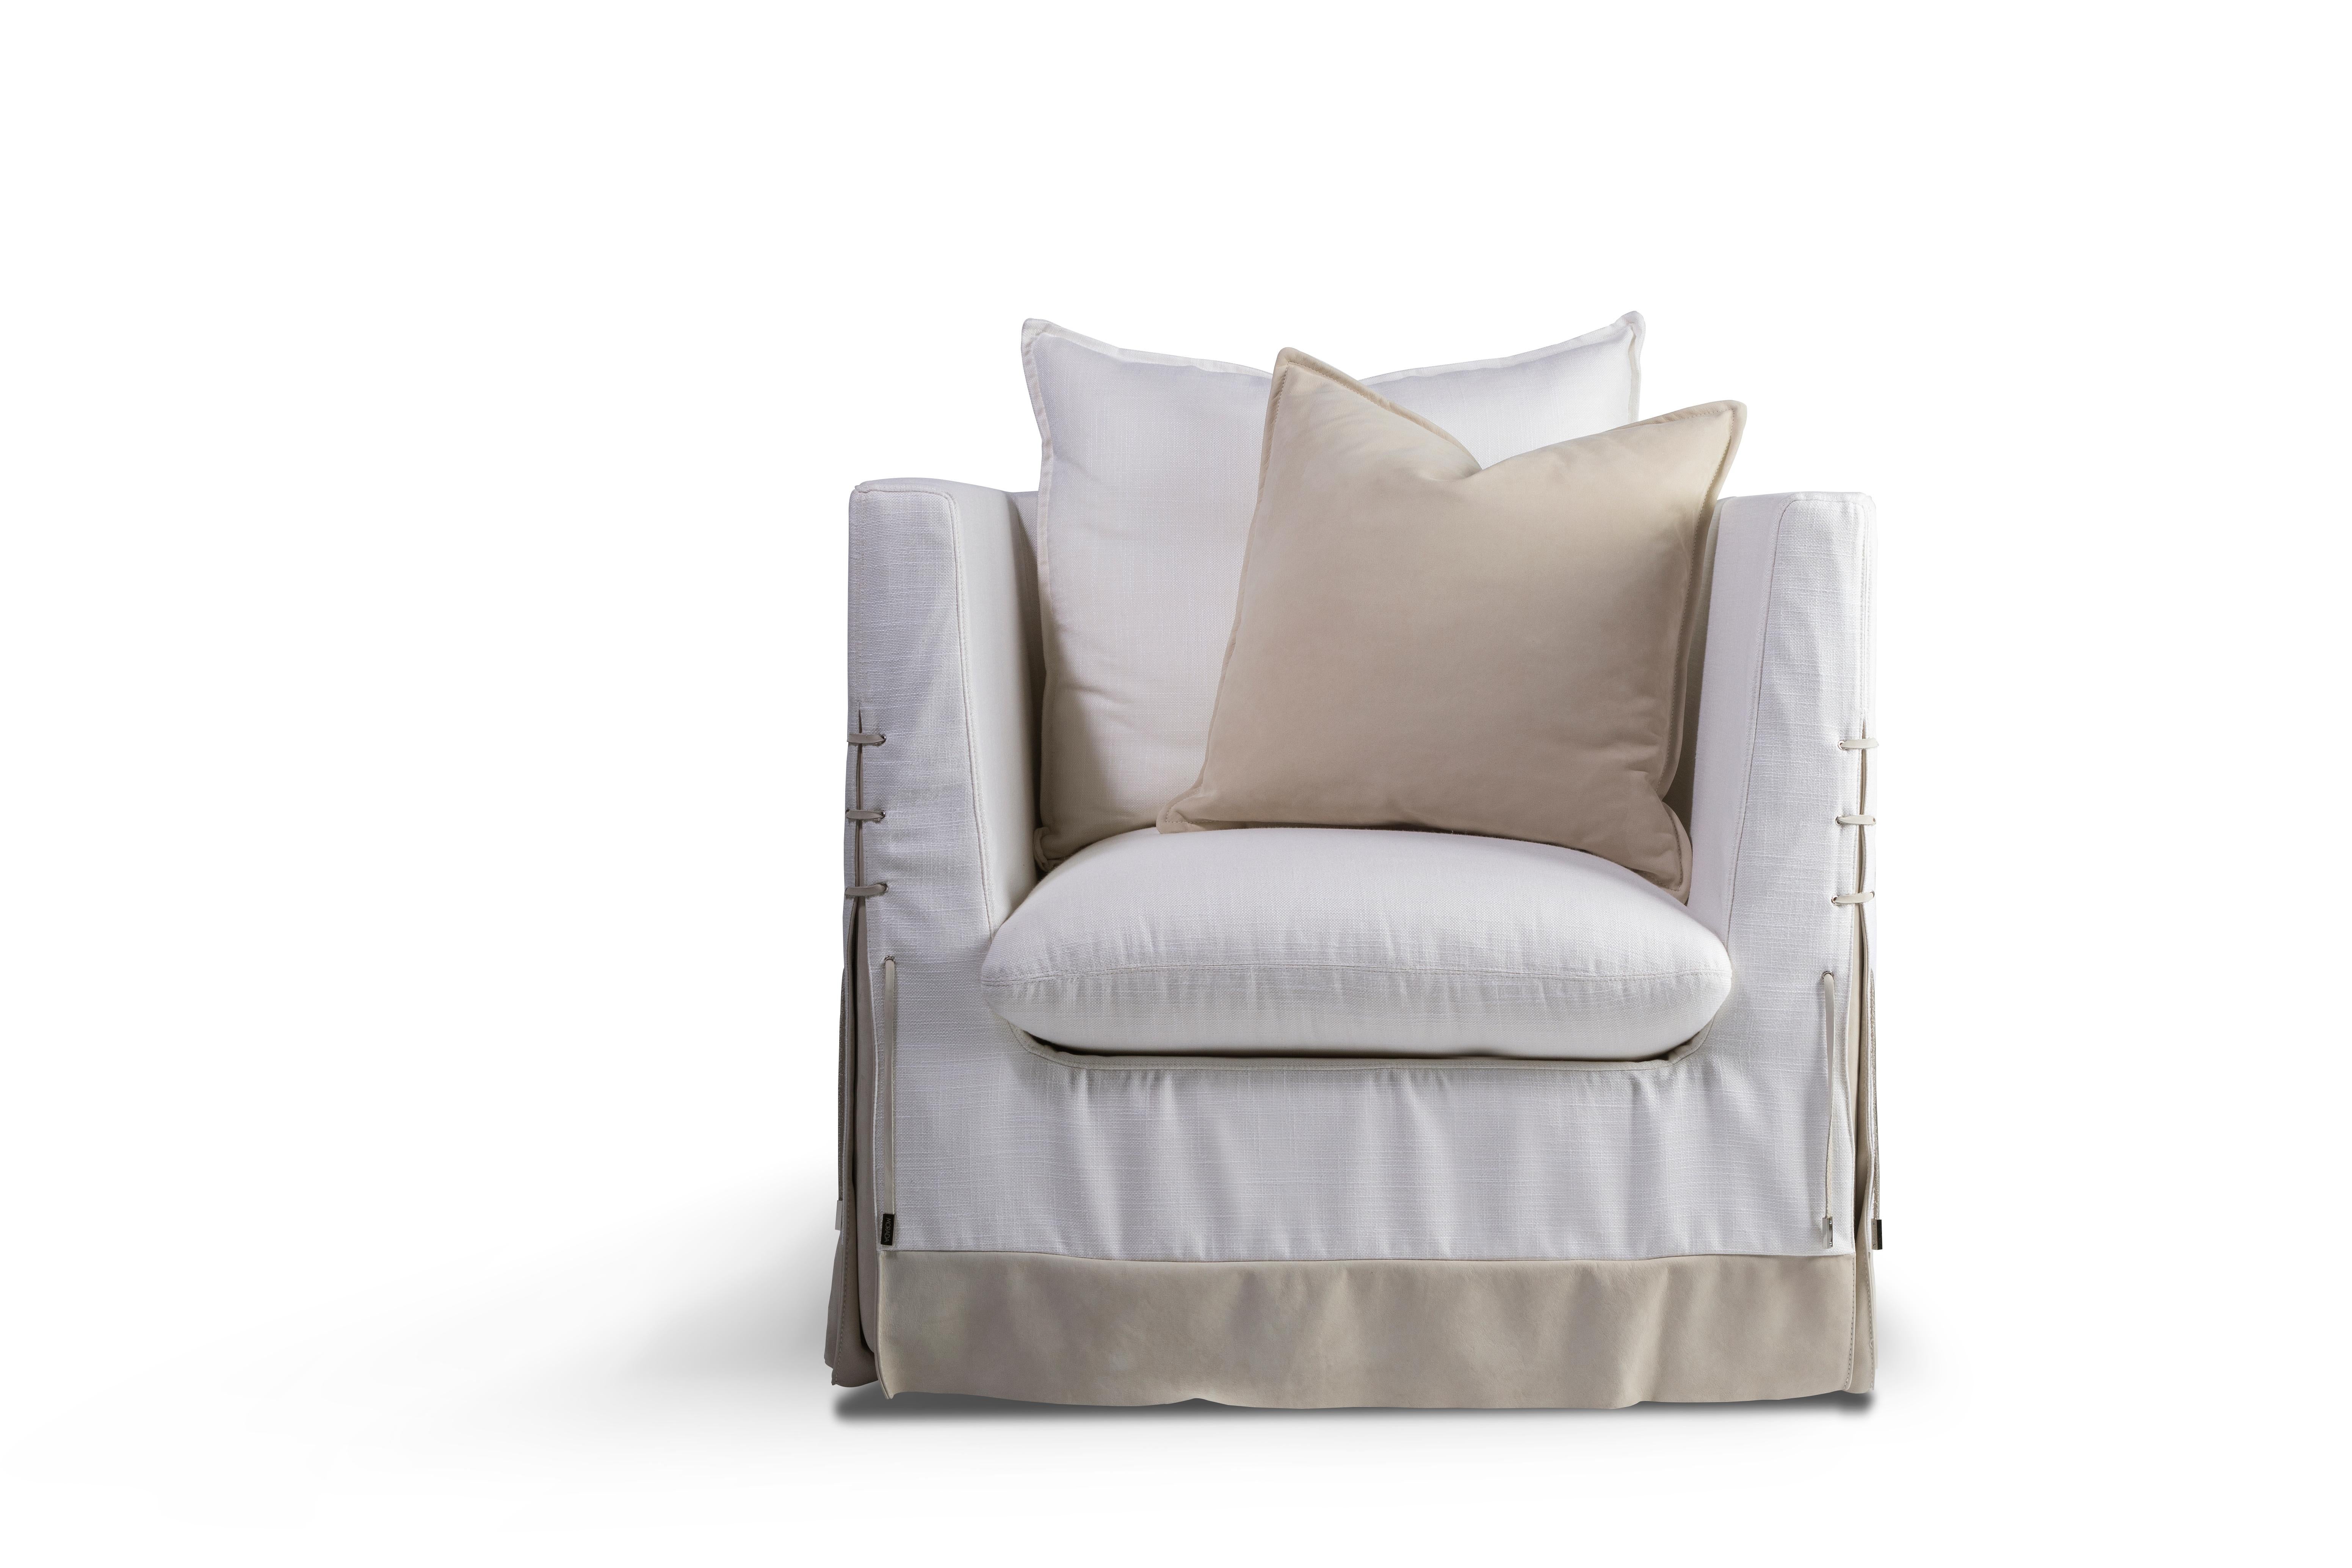 Inspired by the waves of the Caribbean sea landing on the sandy beaches, this comfortable BEACHCOMBER armchair is made of a soft upholstery combination of memory foam and feathers. Together with the distinctive leather laces and border, it provides